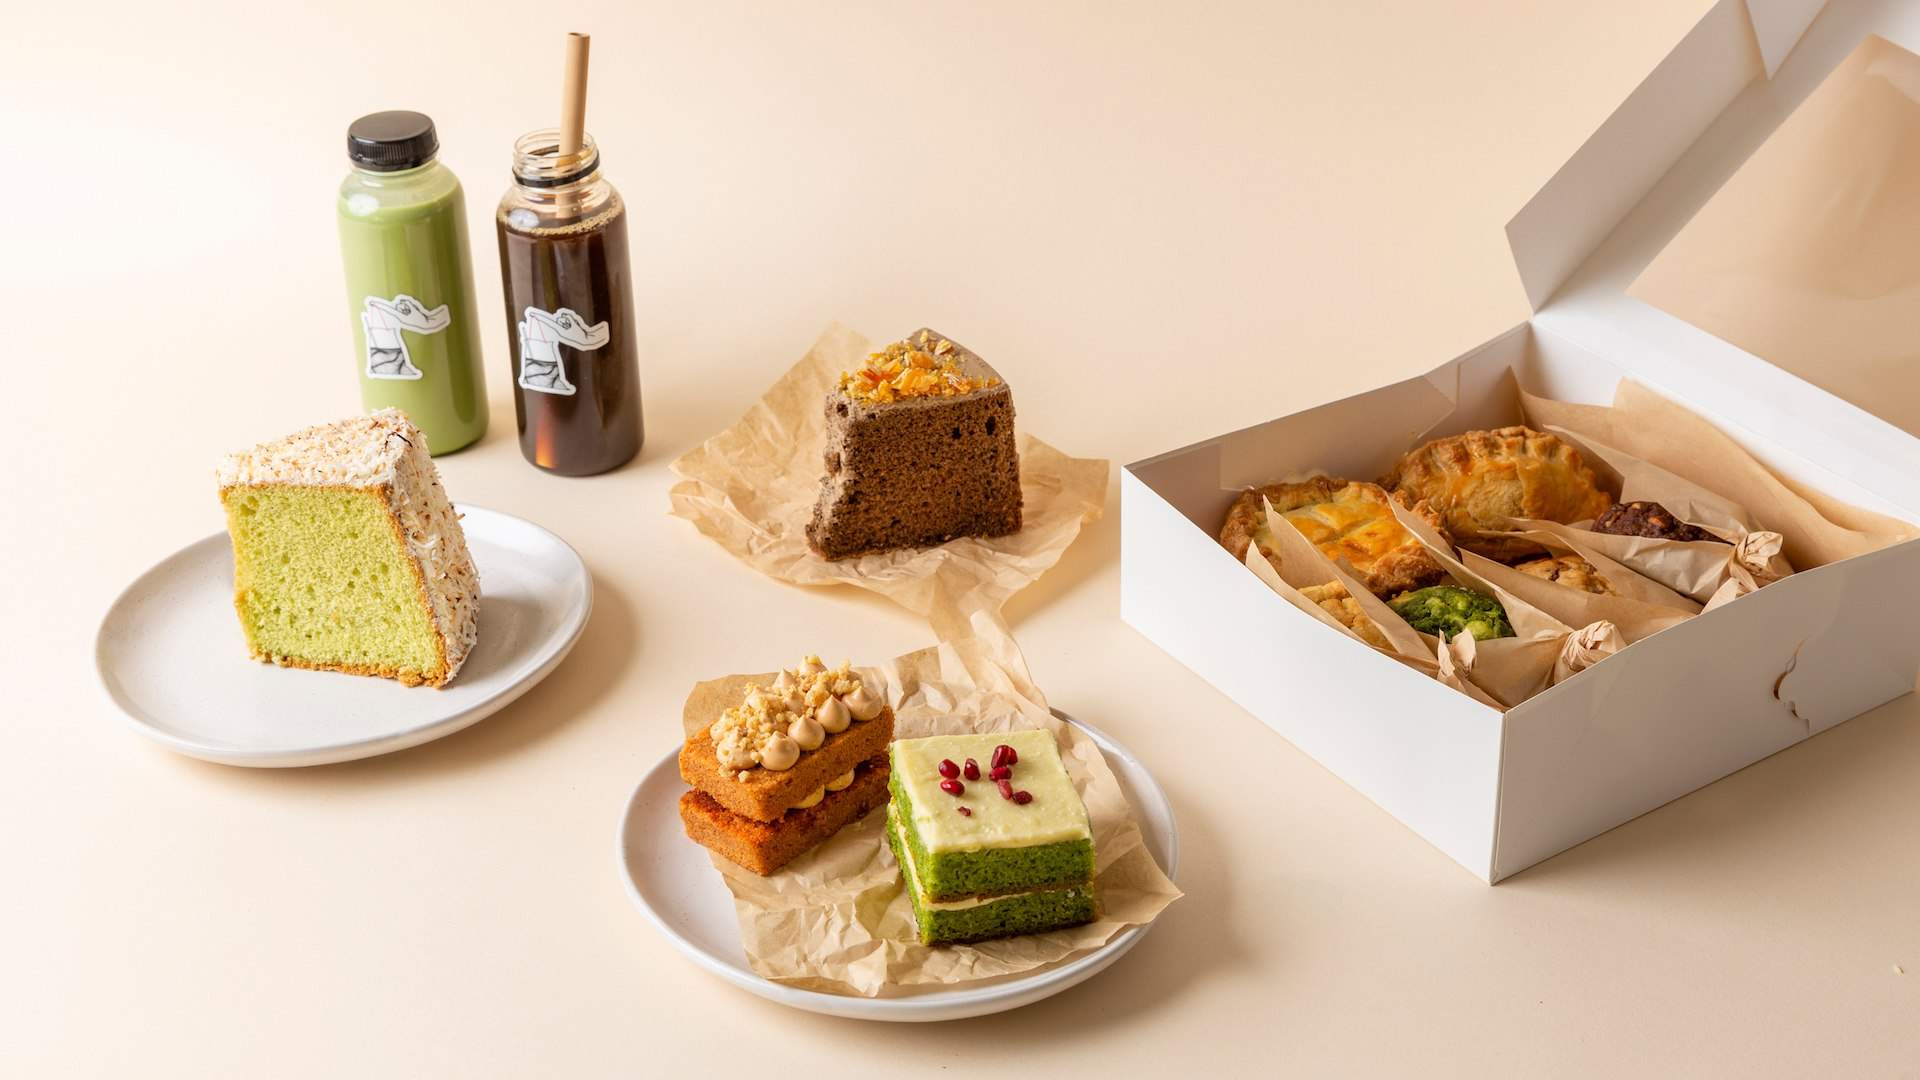 Raya Is Melbourne's New Bakery Brightening Up Lockdown with Malaysian Sweet and Savoury Treats